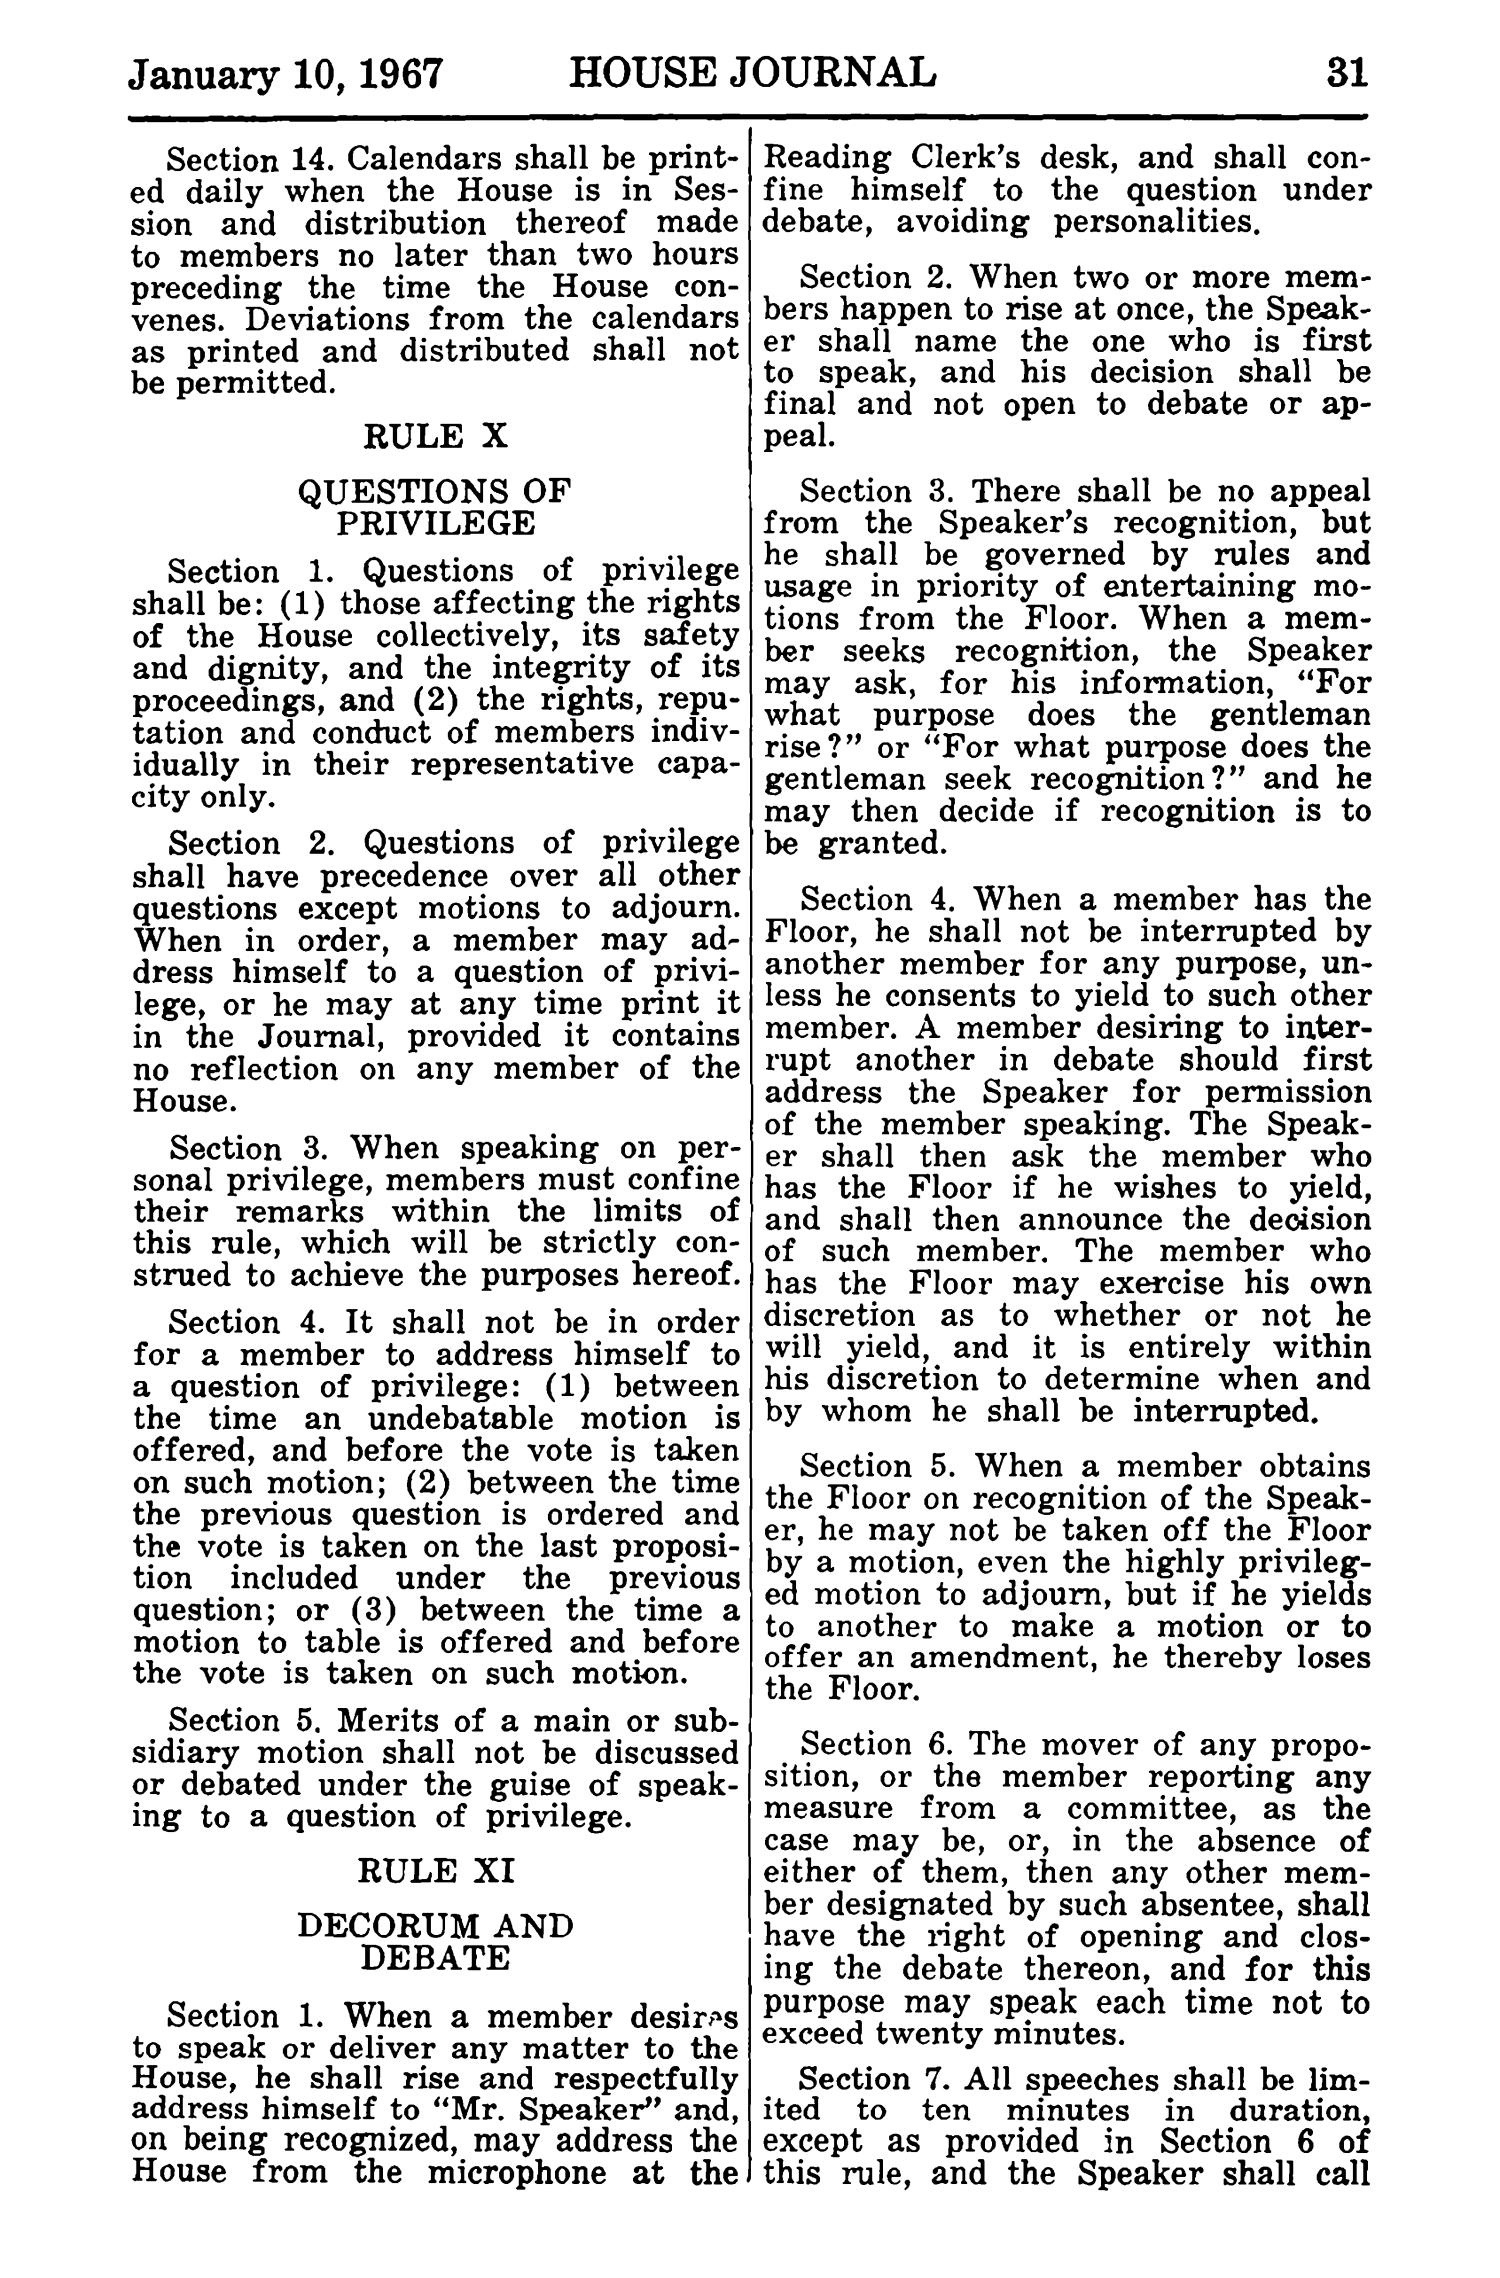 Journal of the House of Representatives of the Regular Session of the Sixtieth Legislature of the State of Texas, Volume 1
                                                
                                                    31
                                                